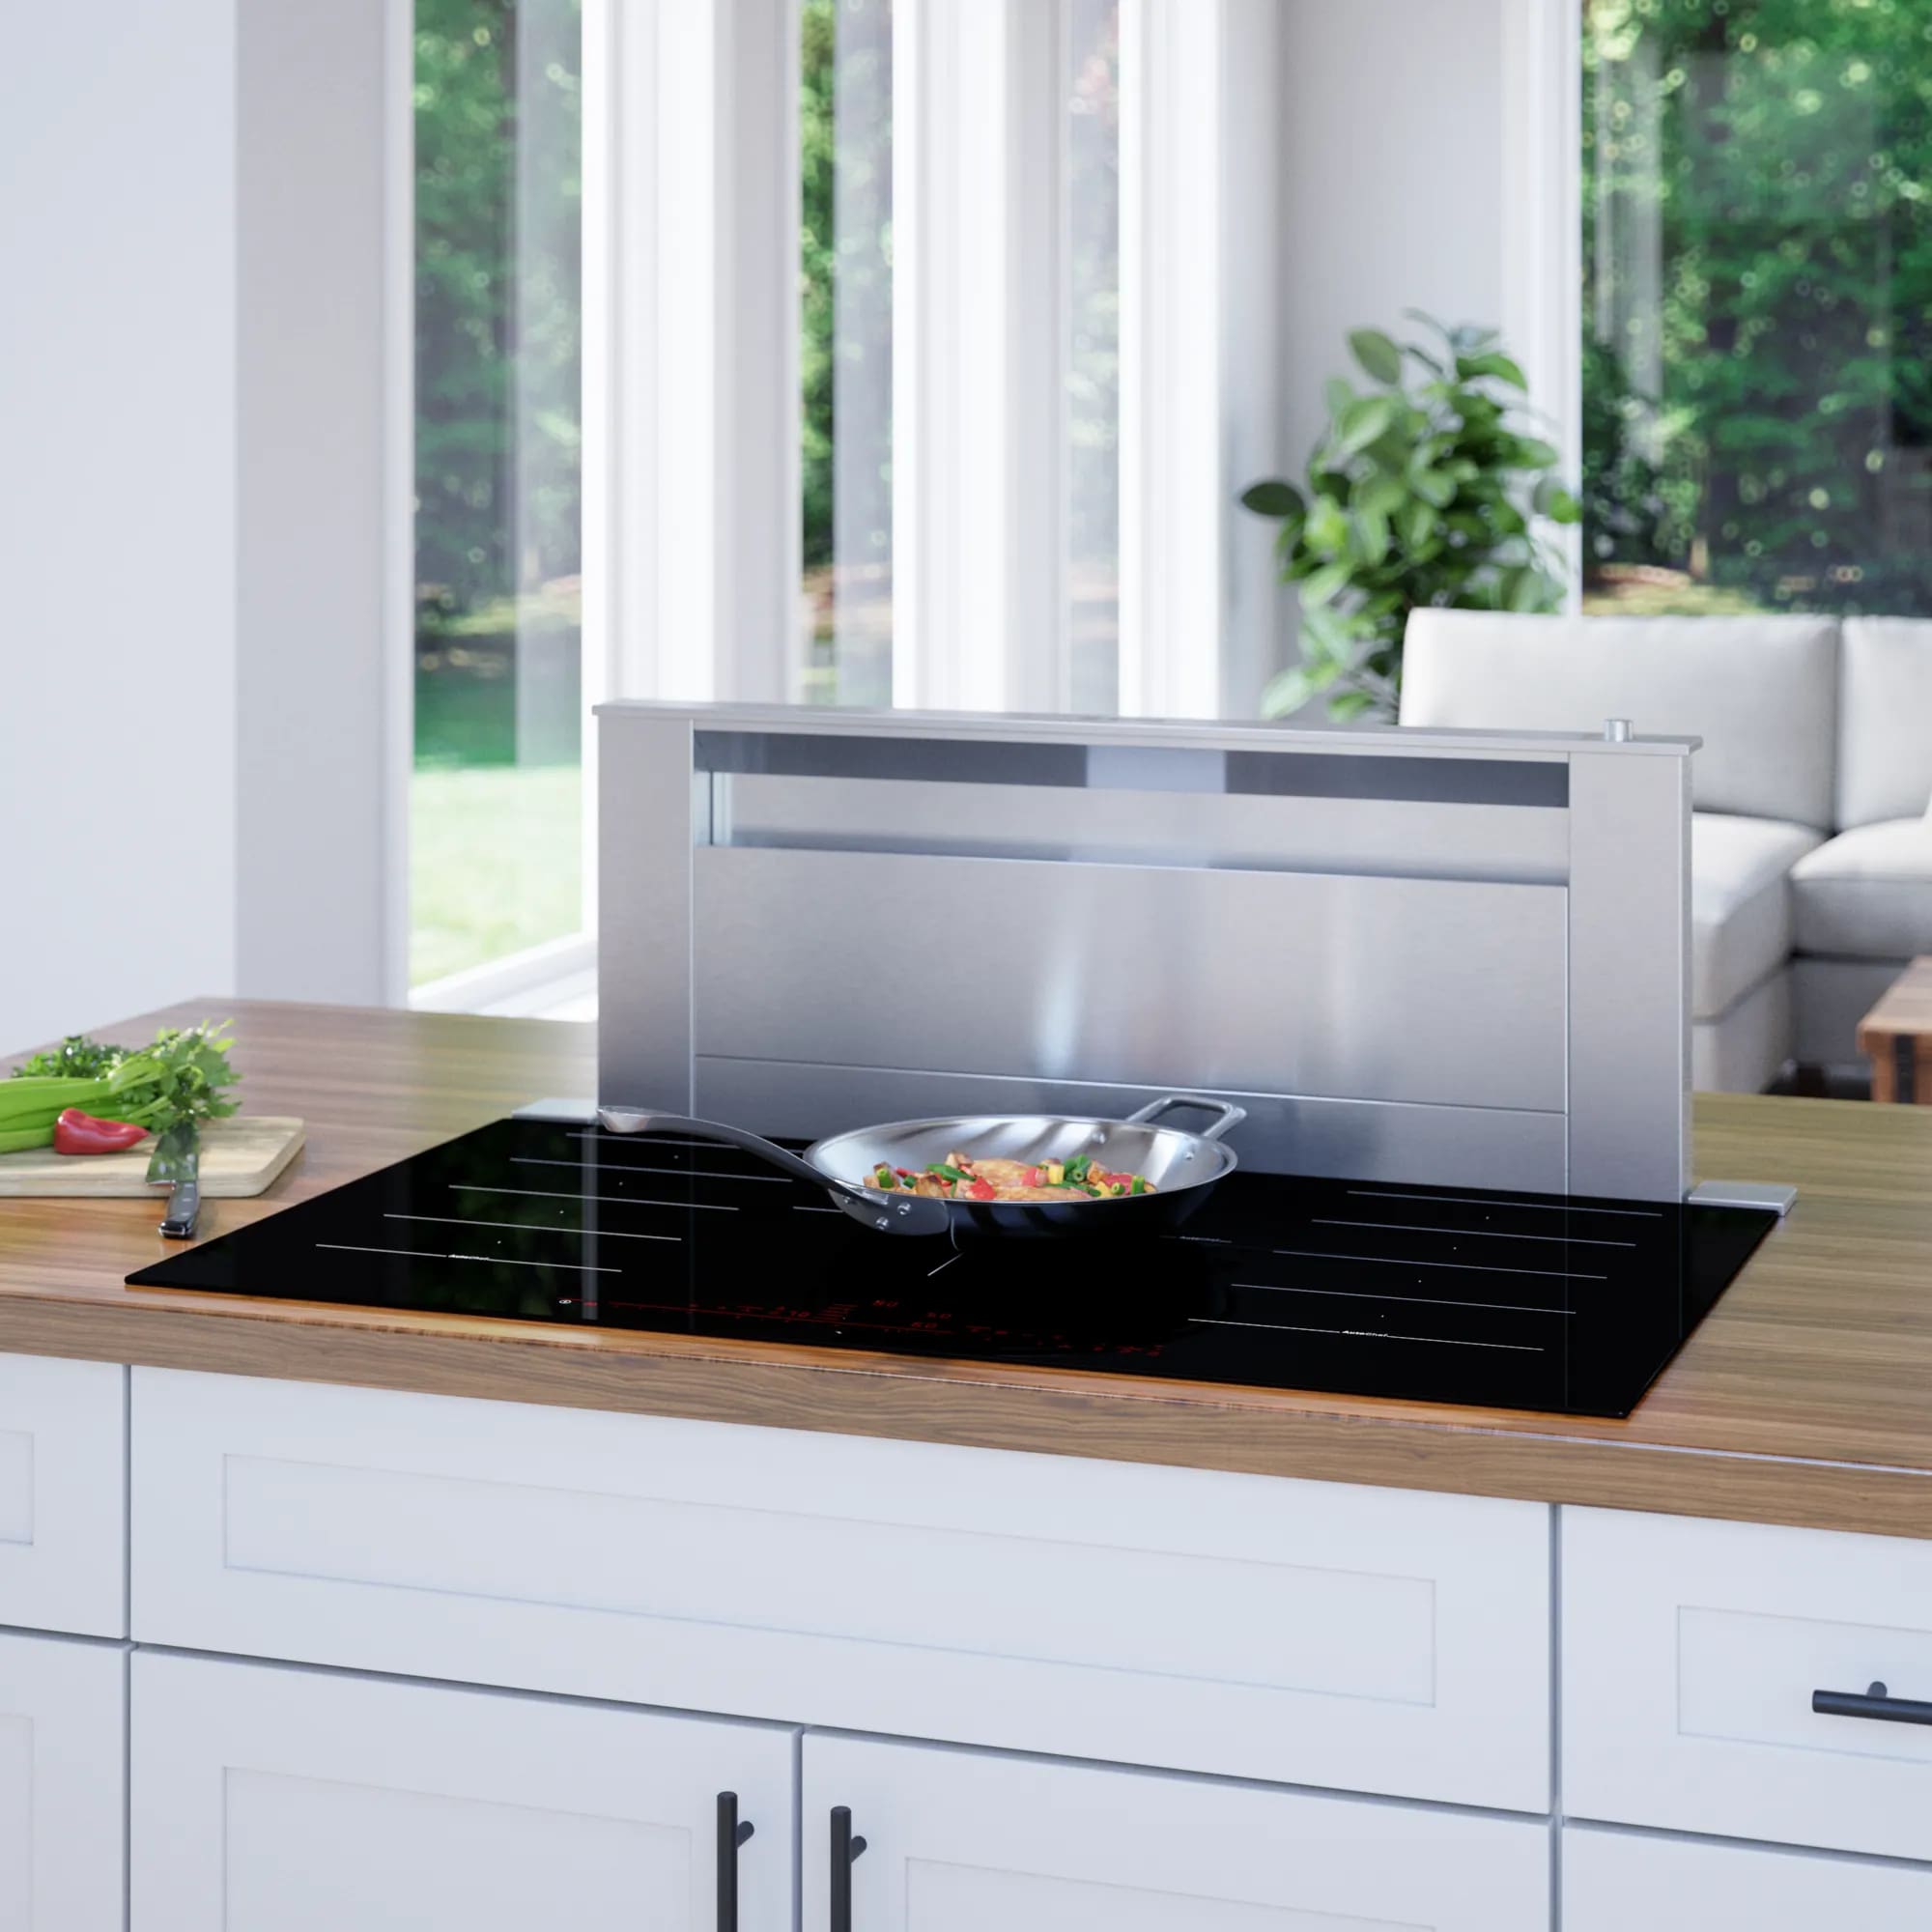 Bosch - 37 Inch Induction Cooktop in Black - NITP660UC